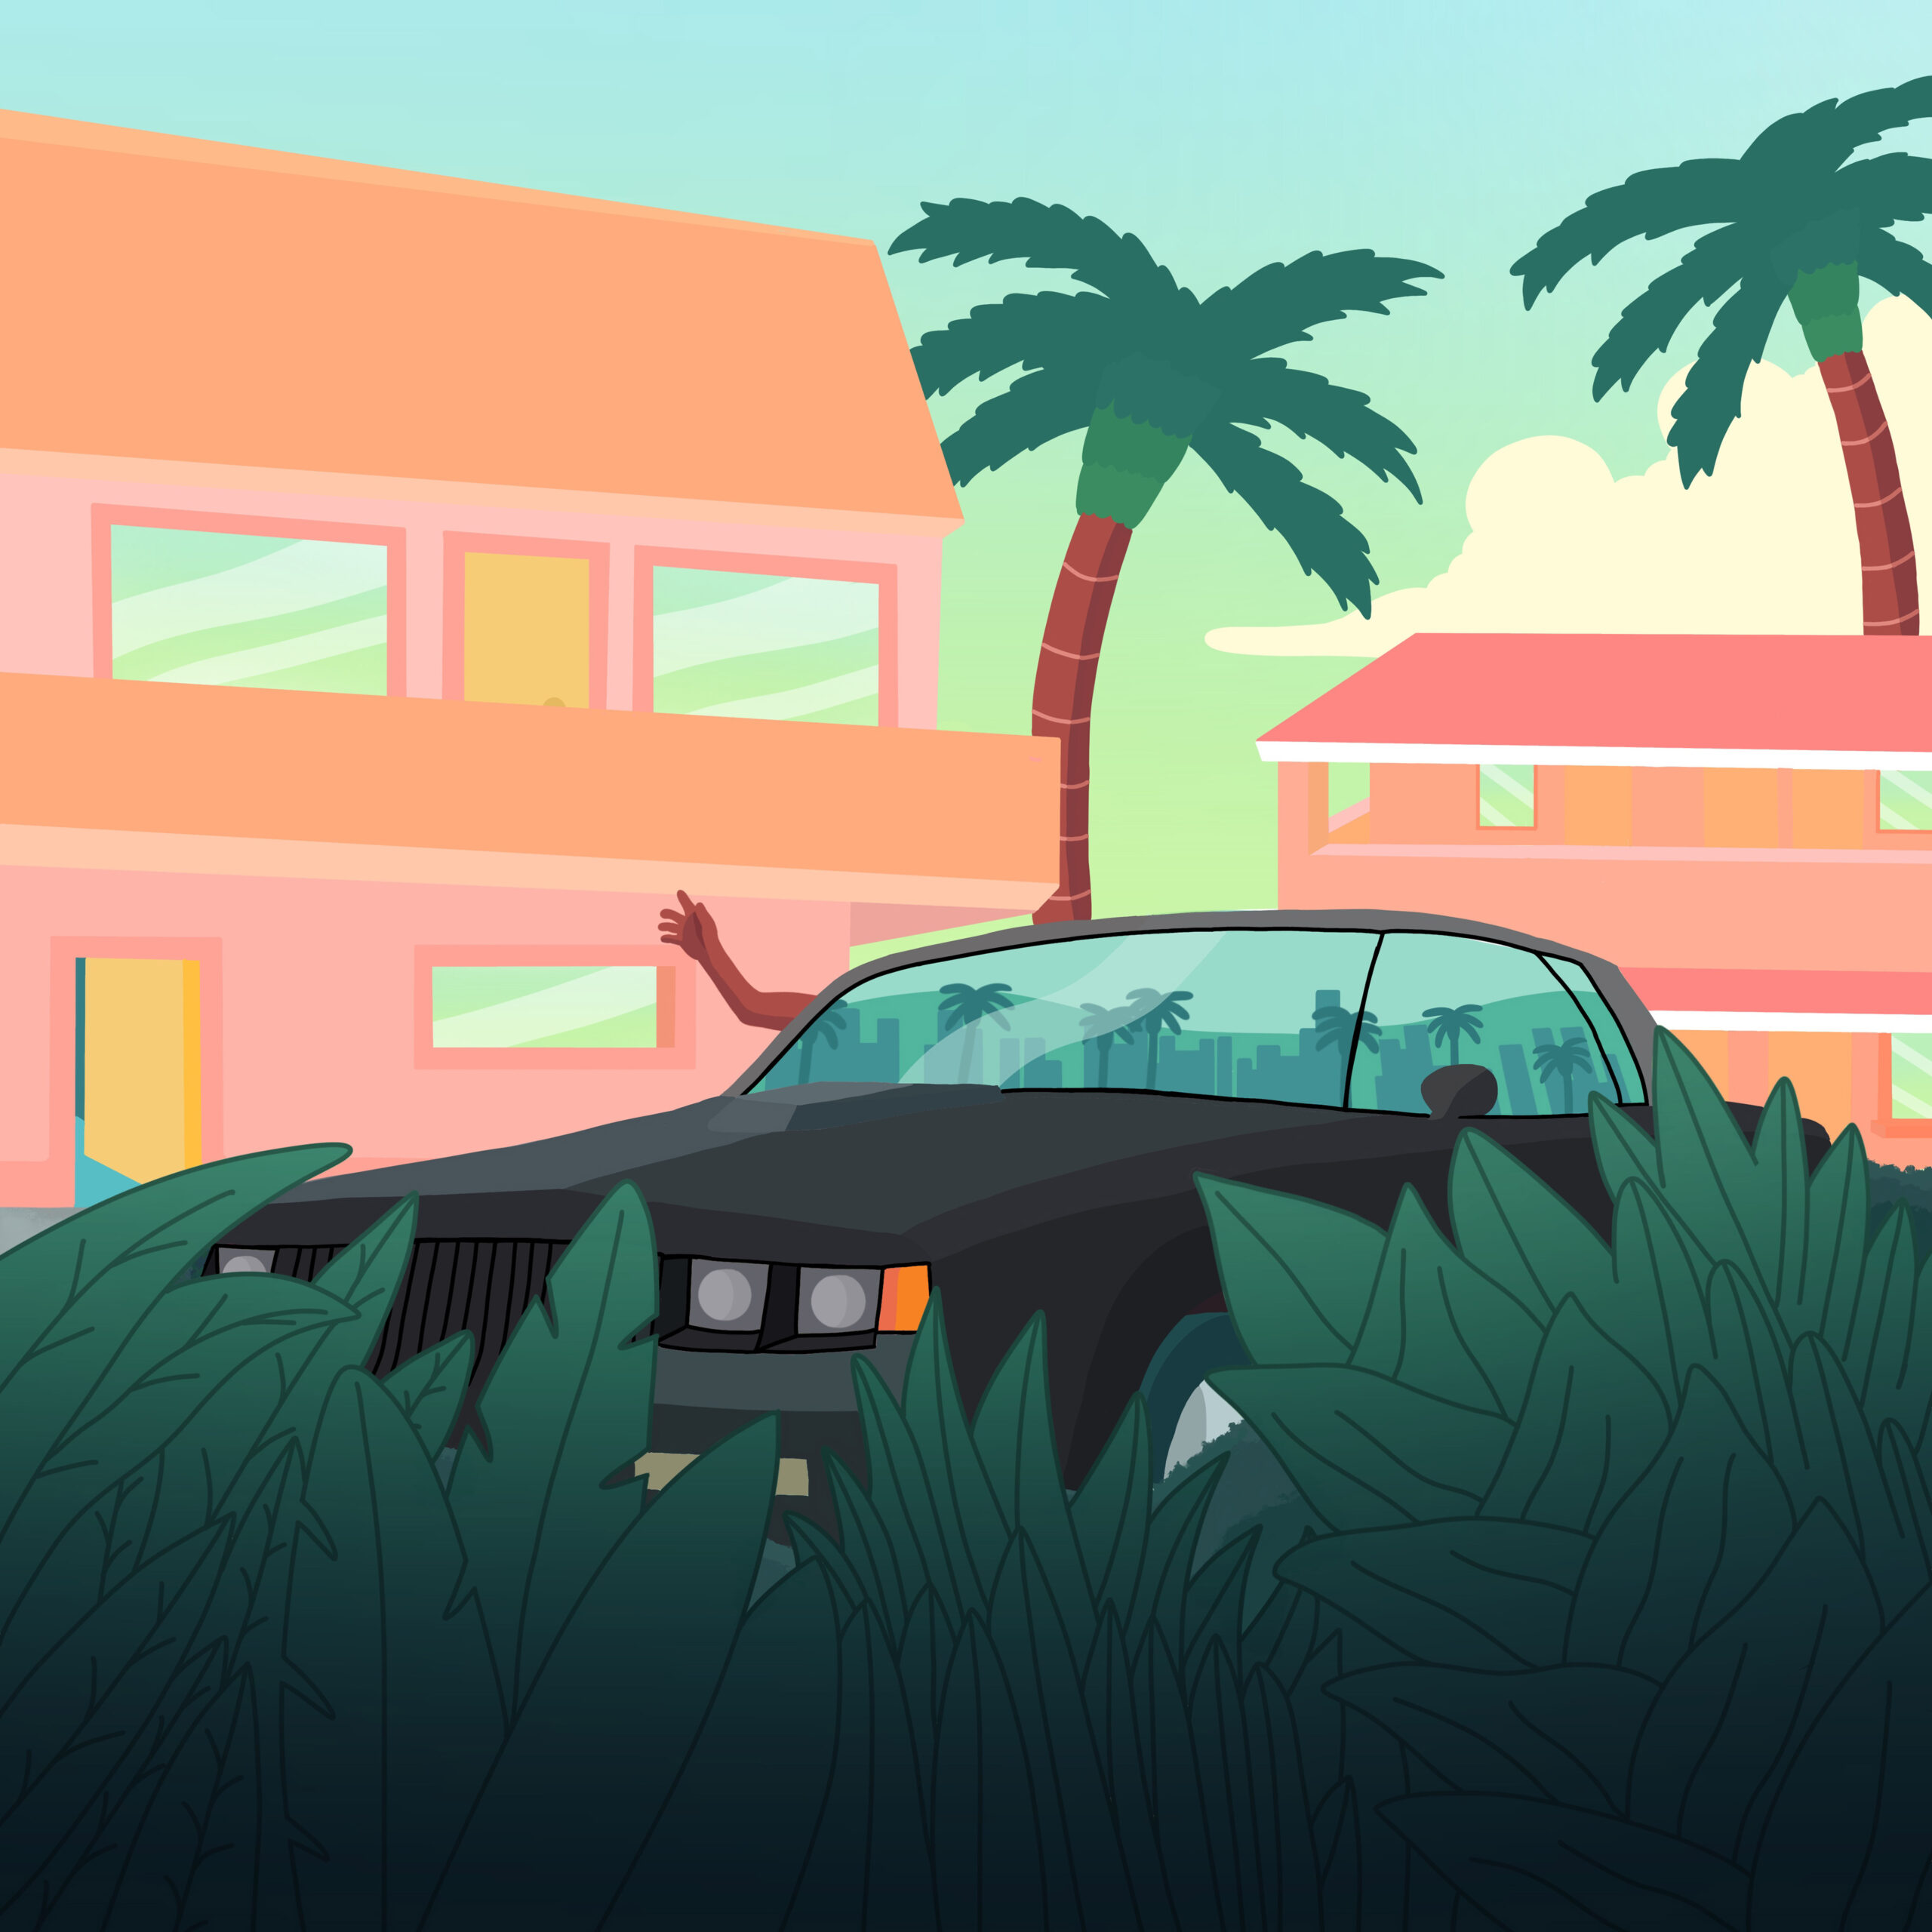 A colorful digital illustration of a car parked behind a bush. There are palm trees in the background. Illustrated by Max Van Hosen.